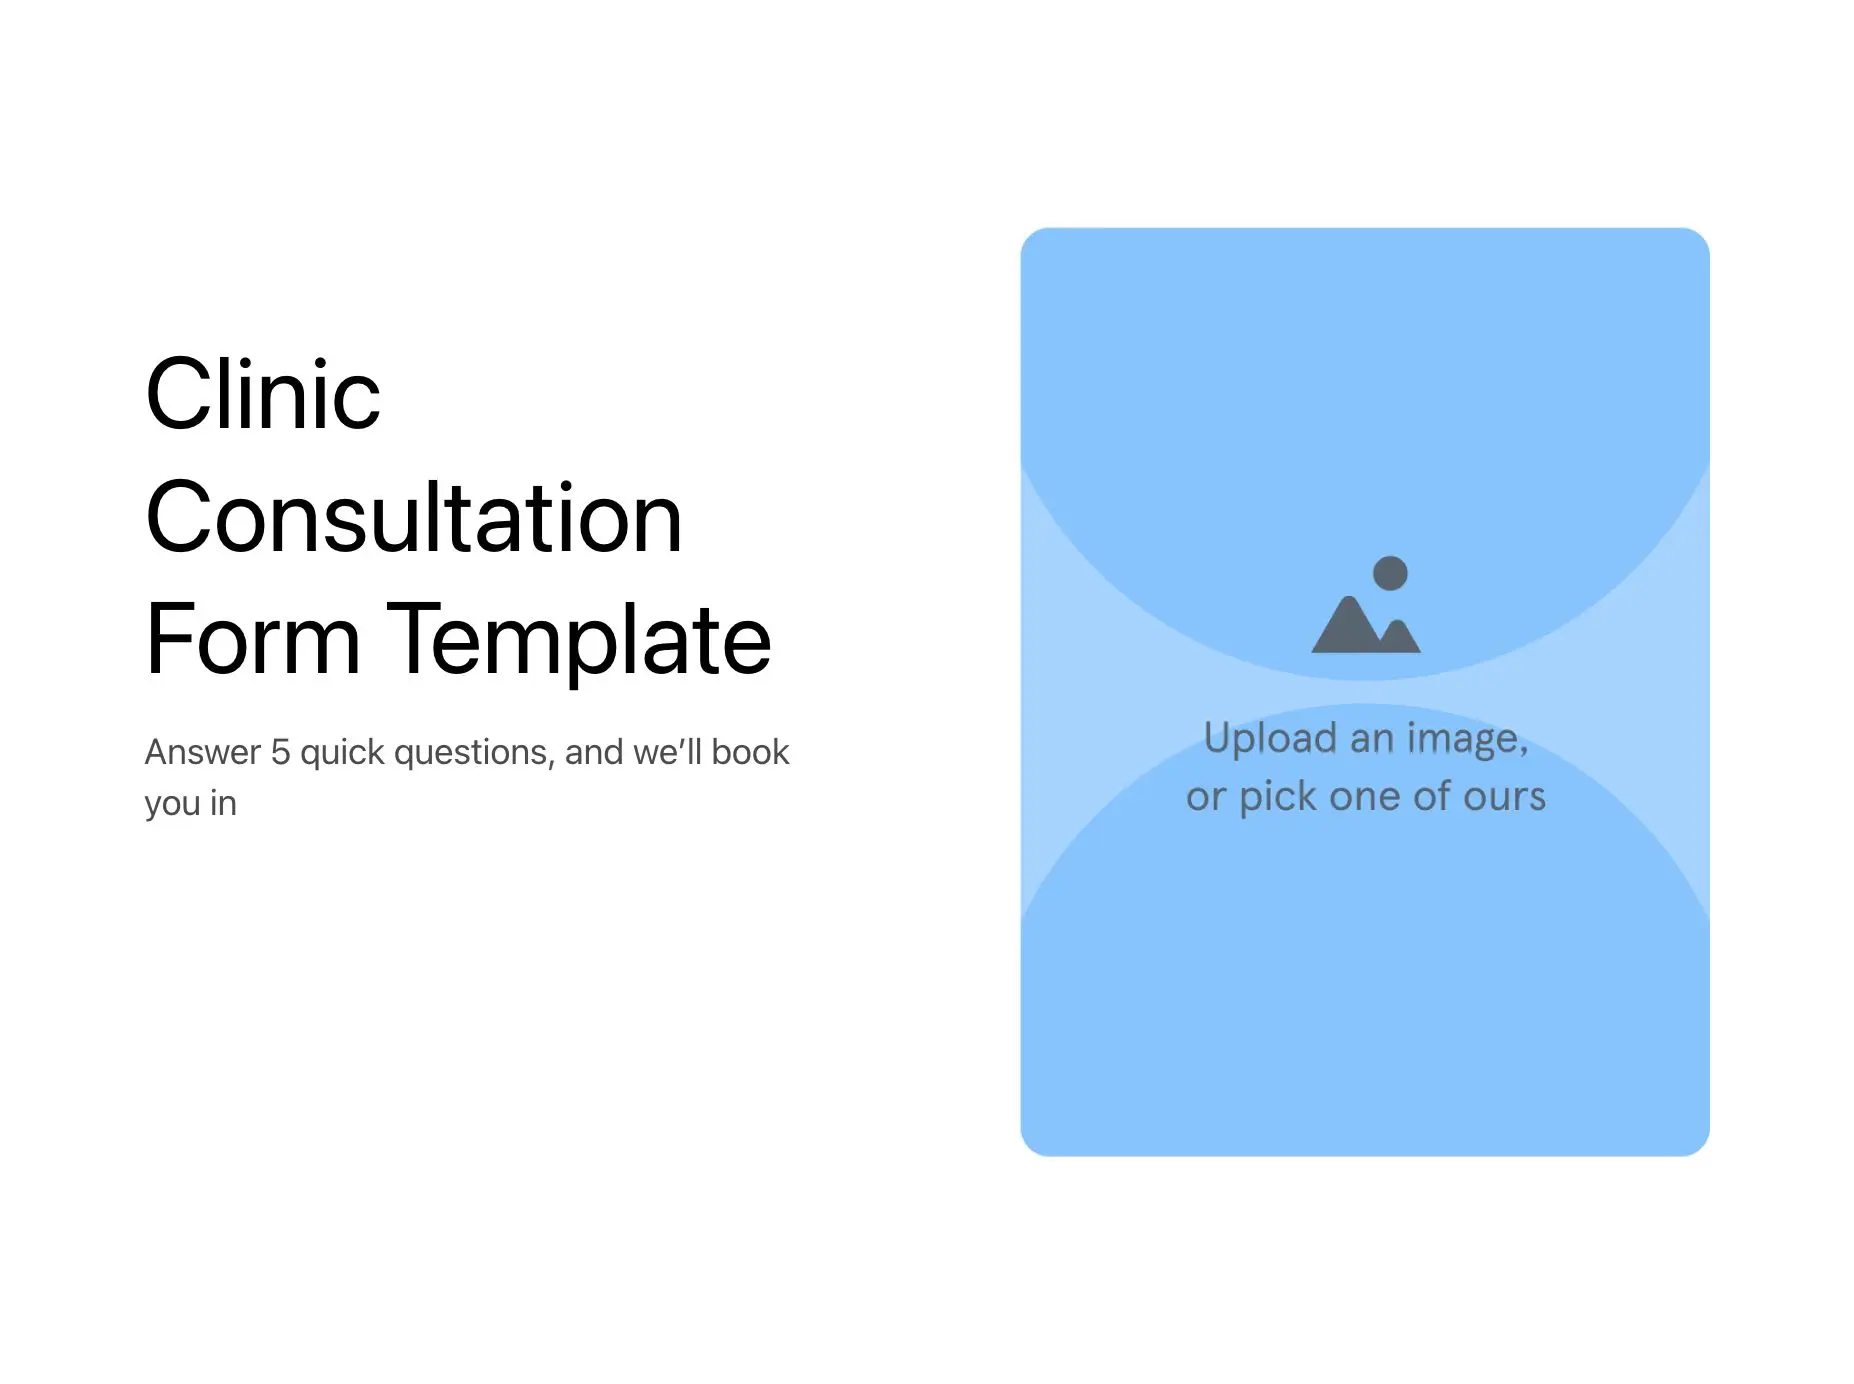 Clinic Consultation Form Template Hero